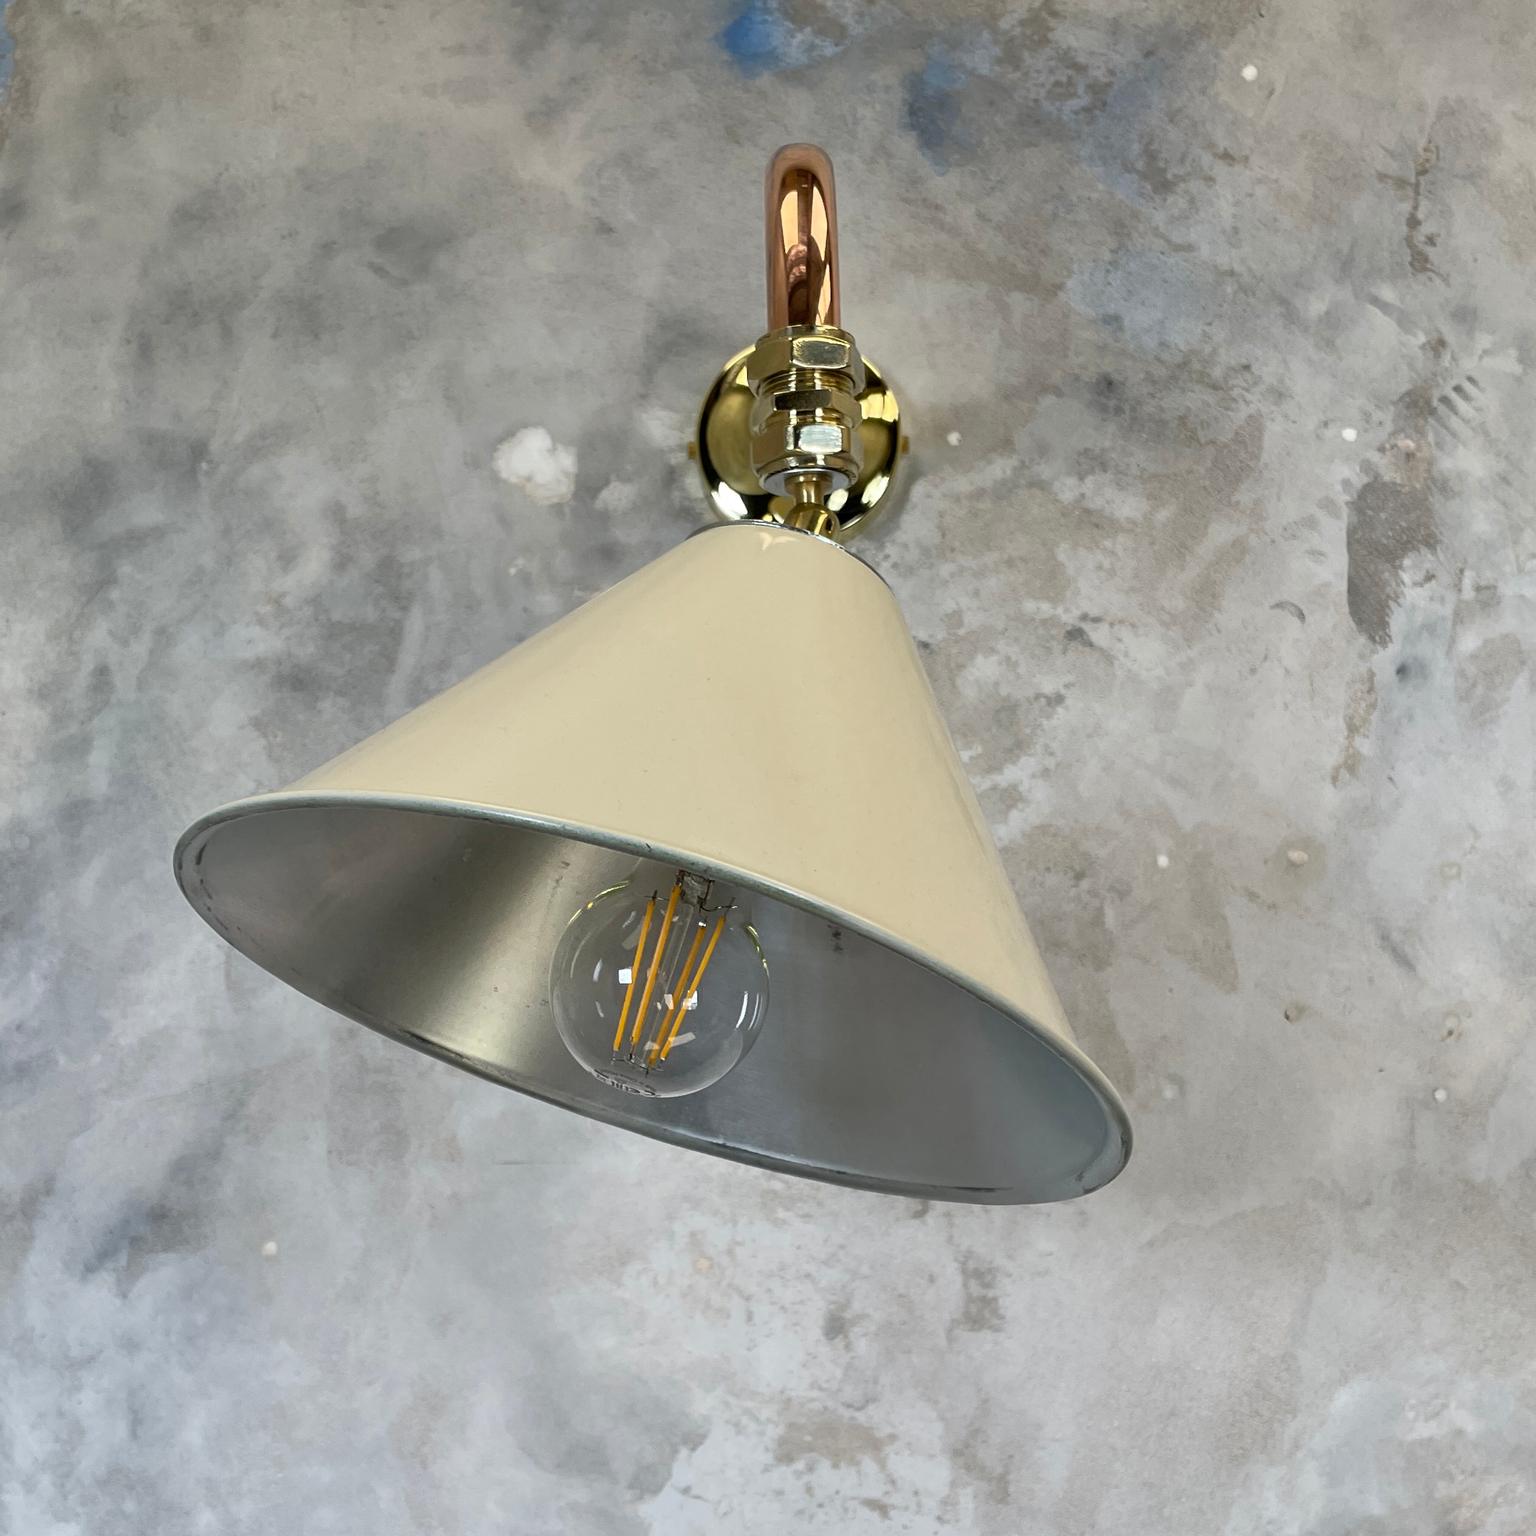 1980's Copper & Brass Cantilever Lamp Cream British Army Lamp Shade For Sale 11